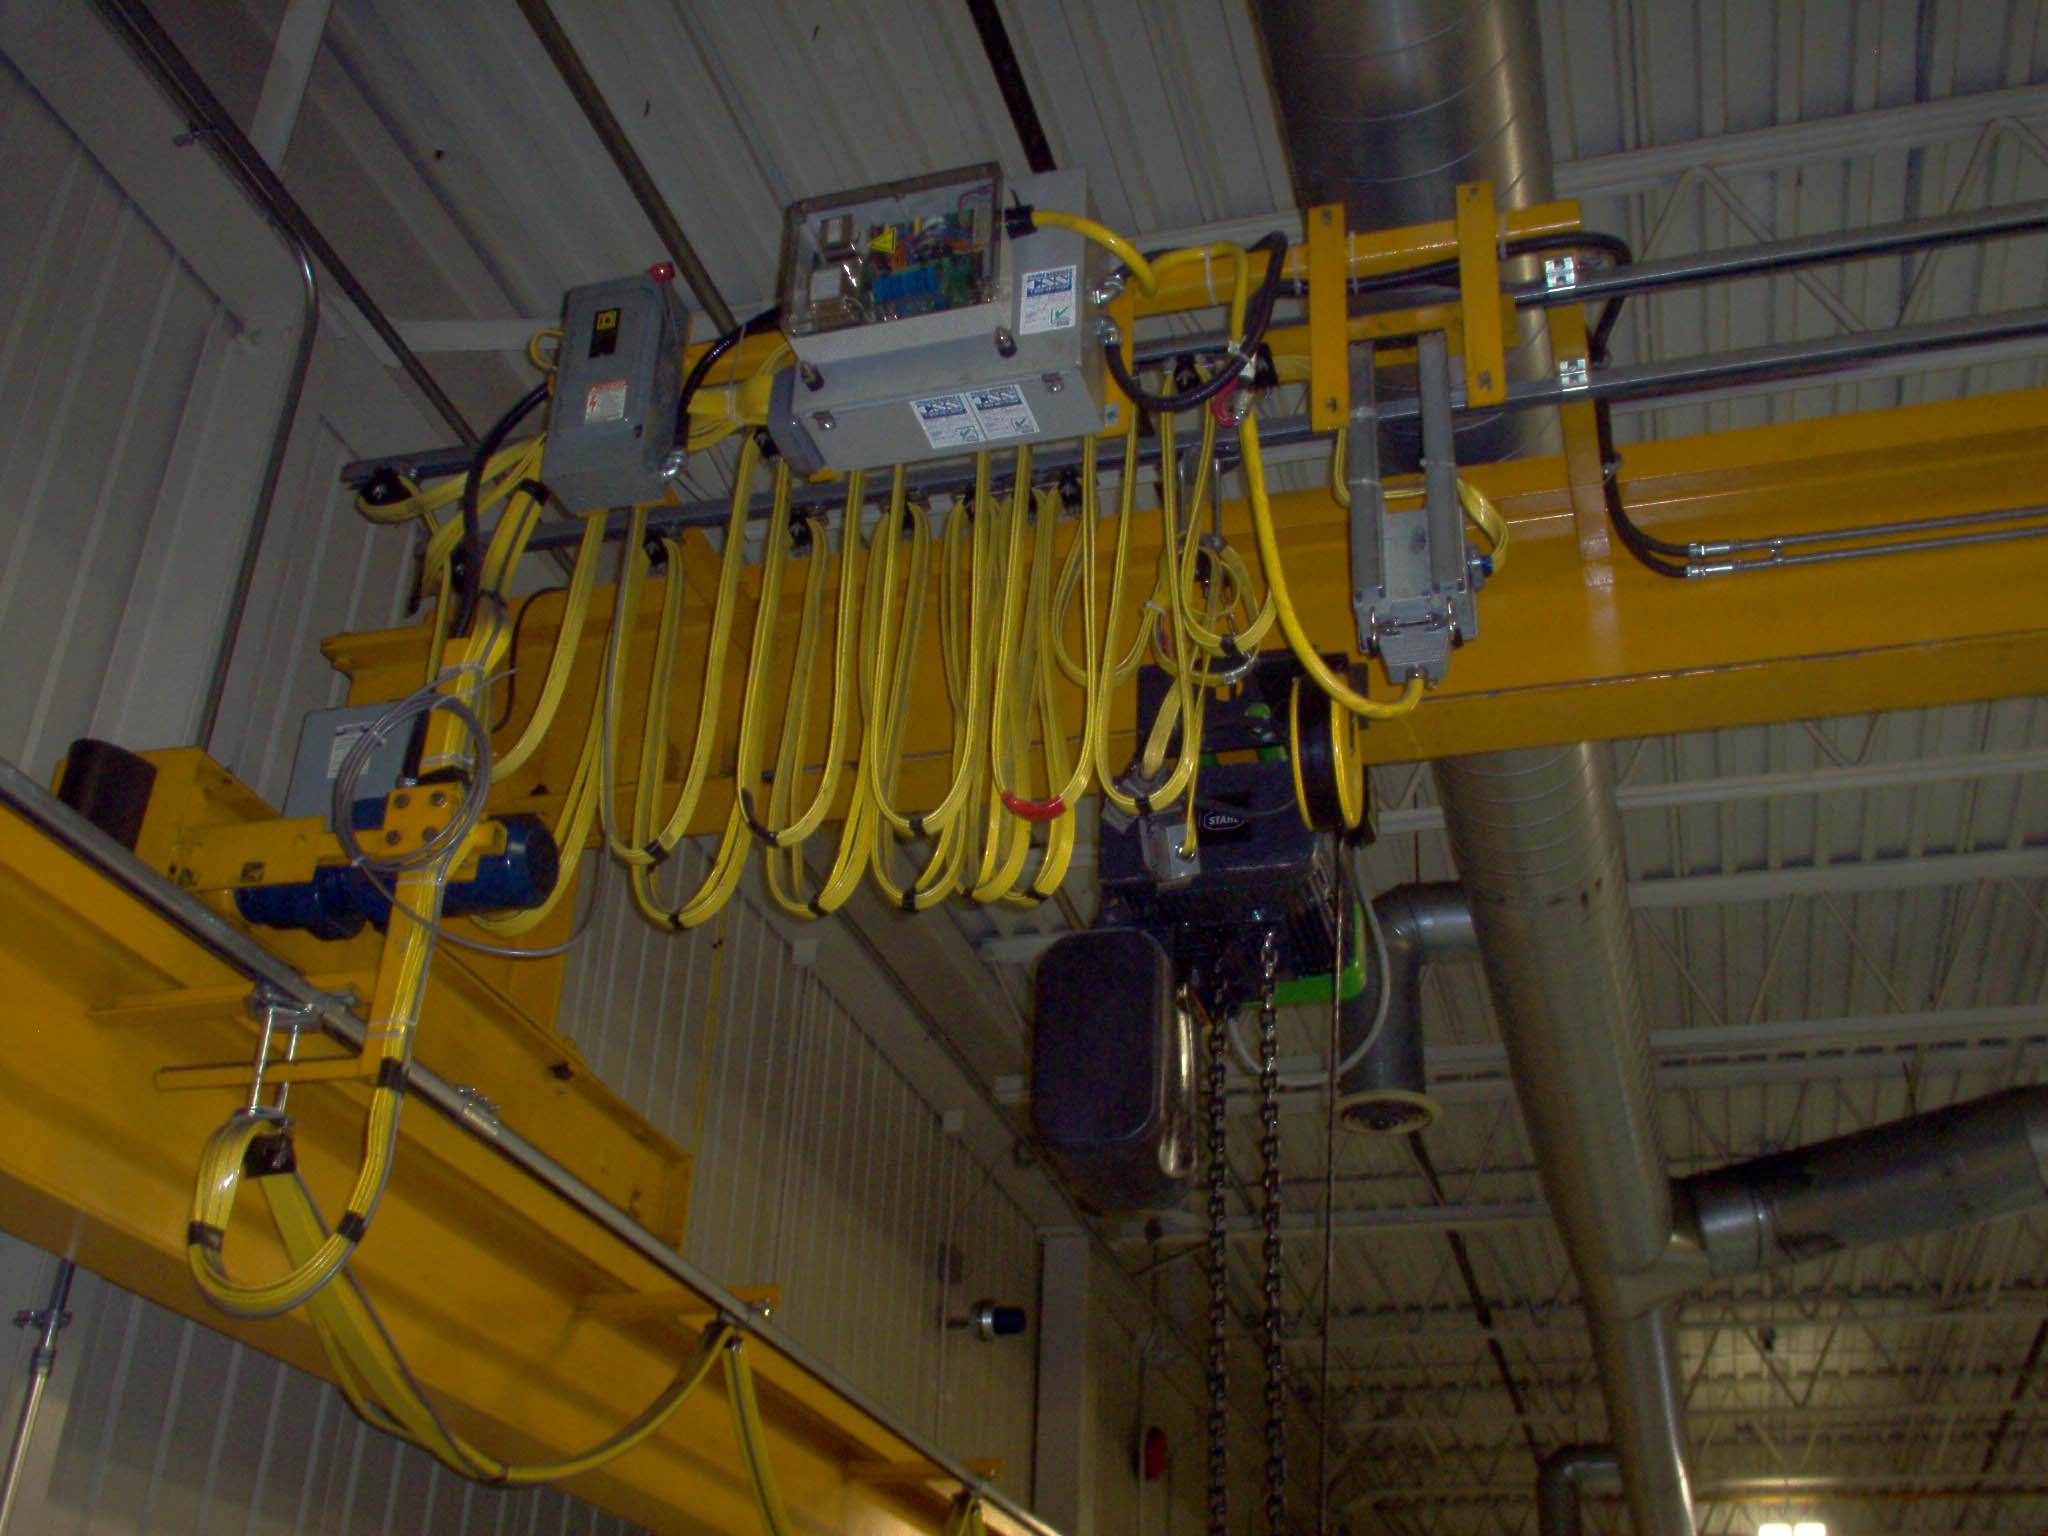 How remotes can create more safety for your employees while using bridge cranes